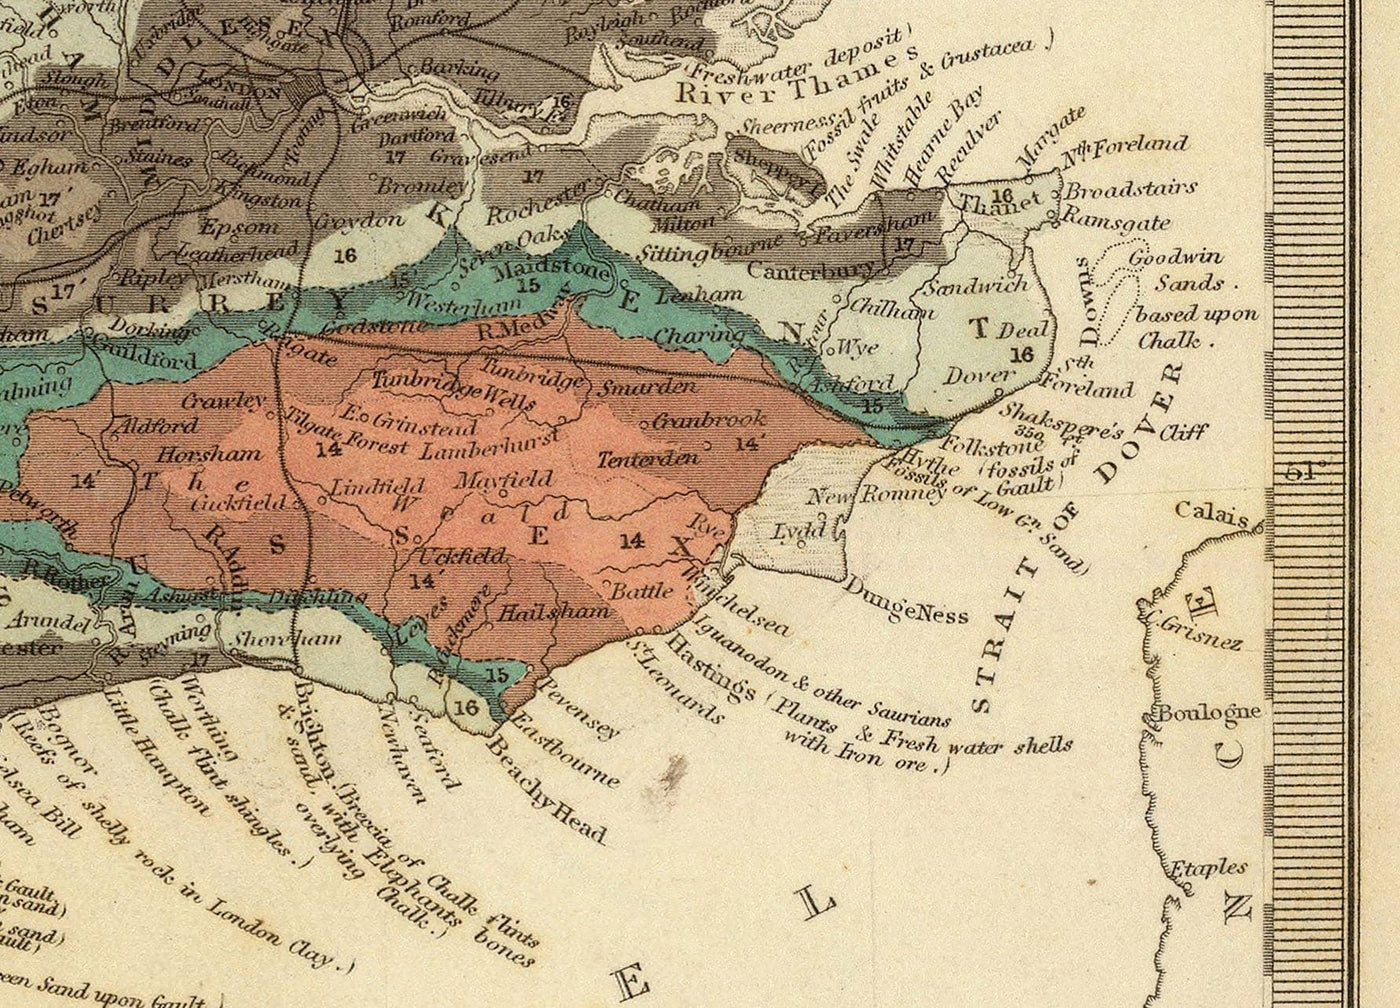 Old geological map of England & Wales by Roderick Impey Murchison, 1843